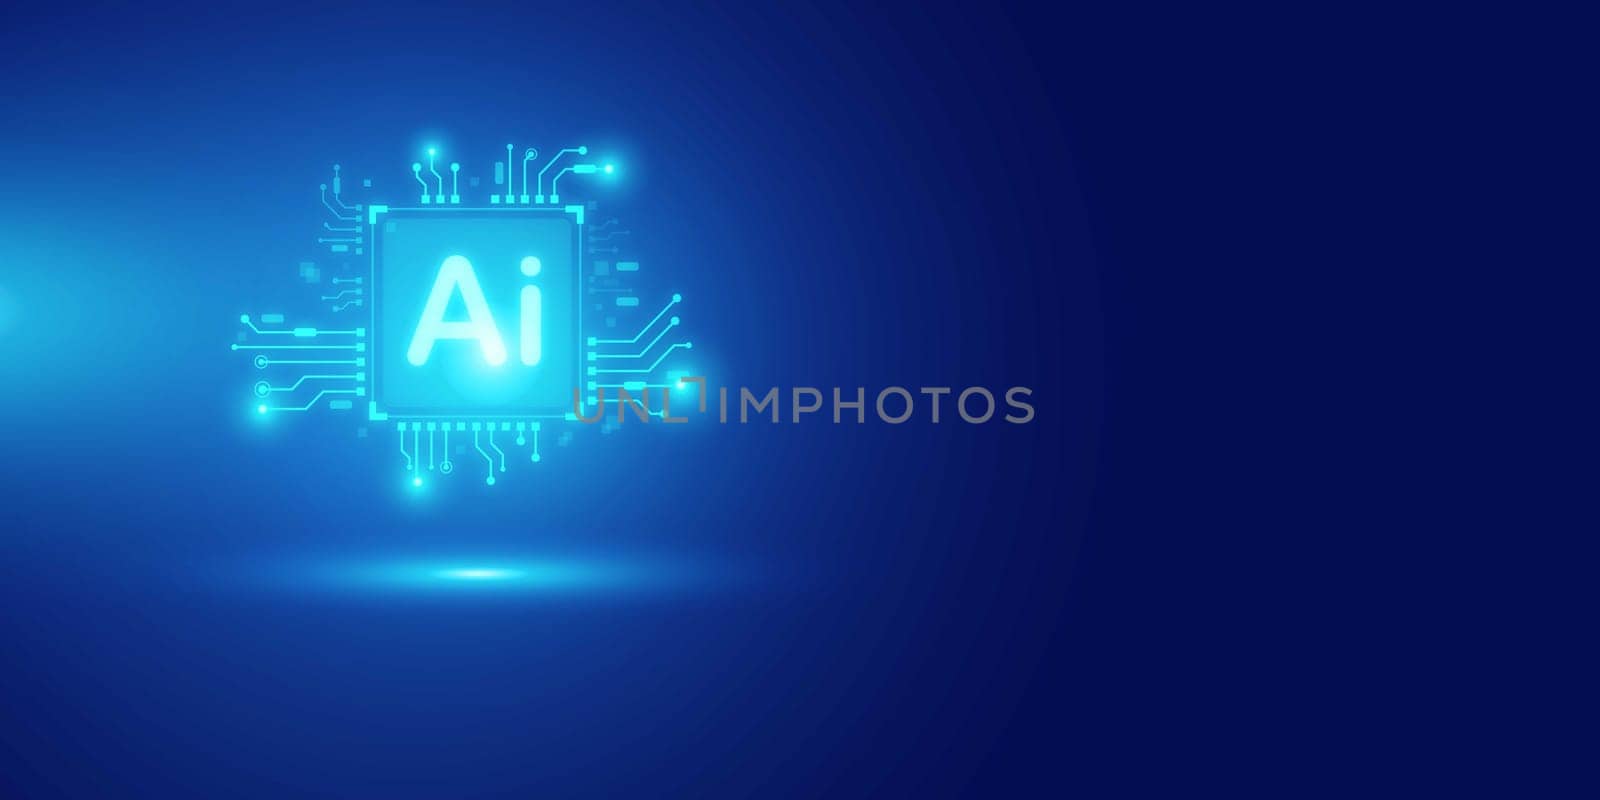 Artificial intelligence Ai self learning improving development problem solving solution tasks of future technology, ai graphics computer chip brain memory power, futuristic blue abstract background. by Unimages2527